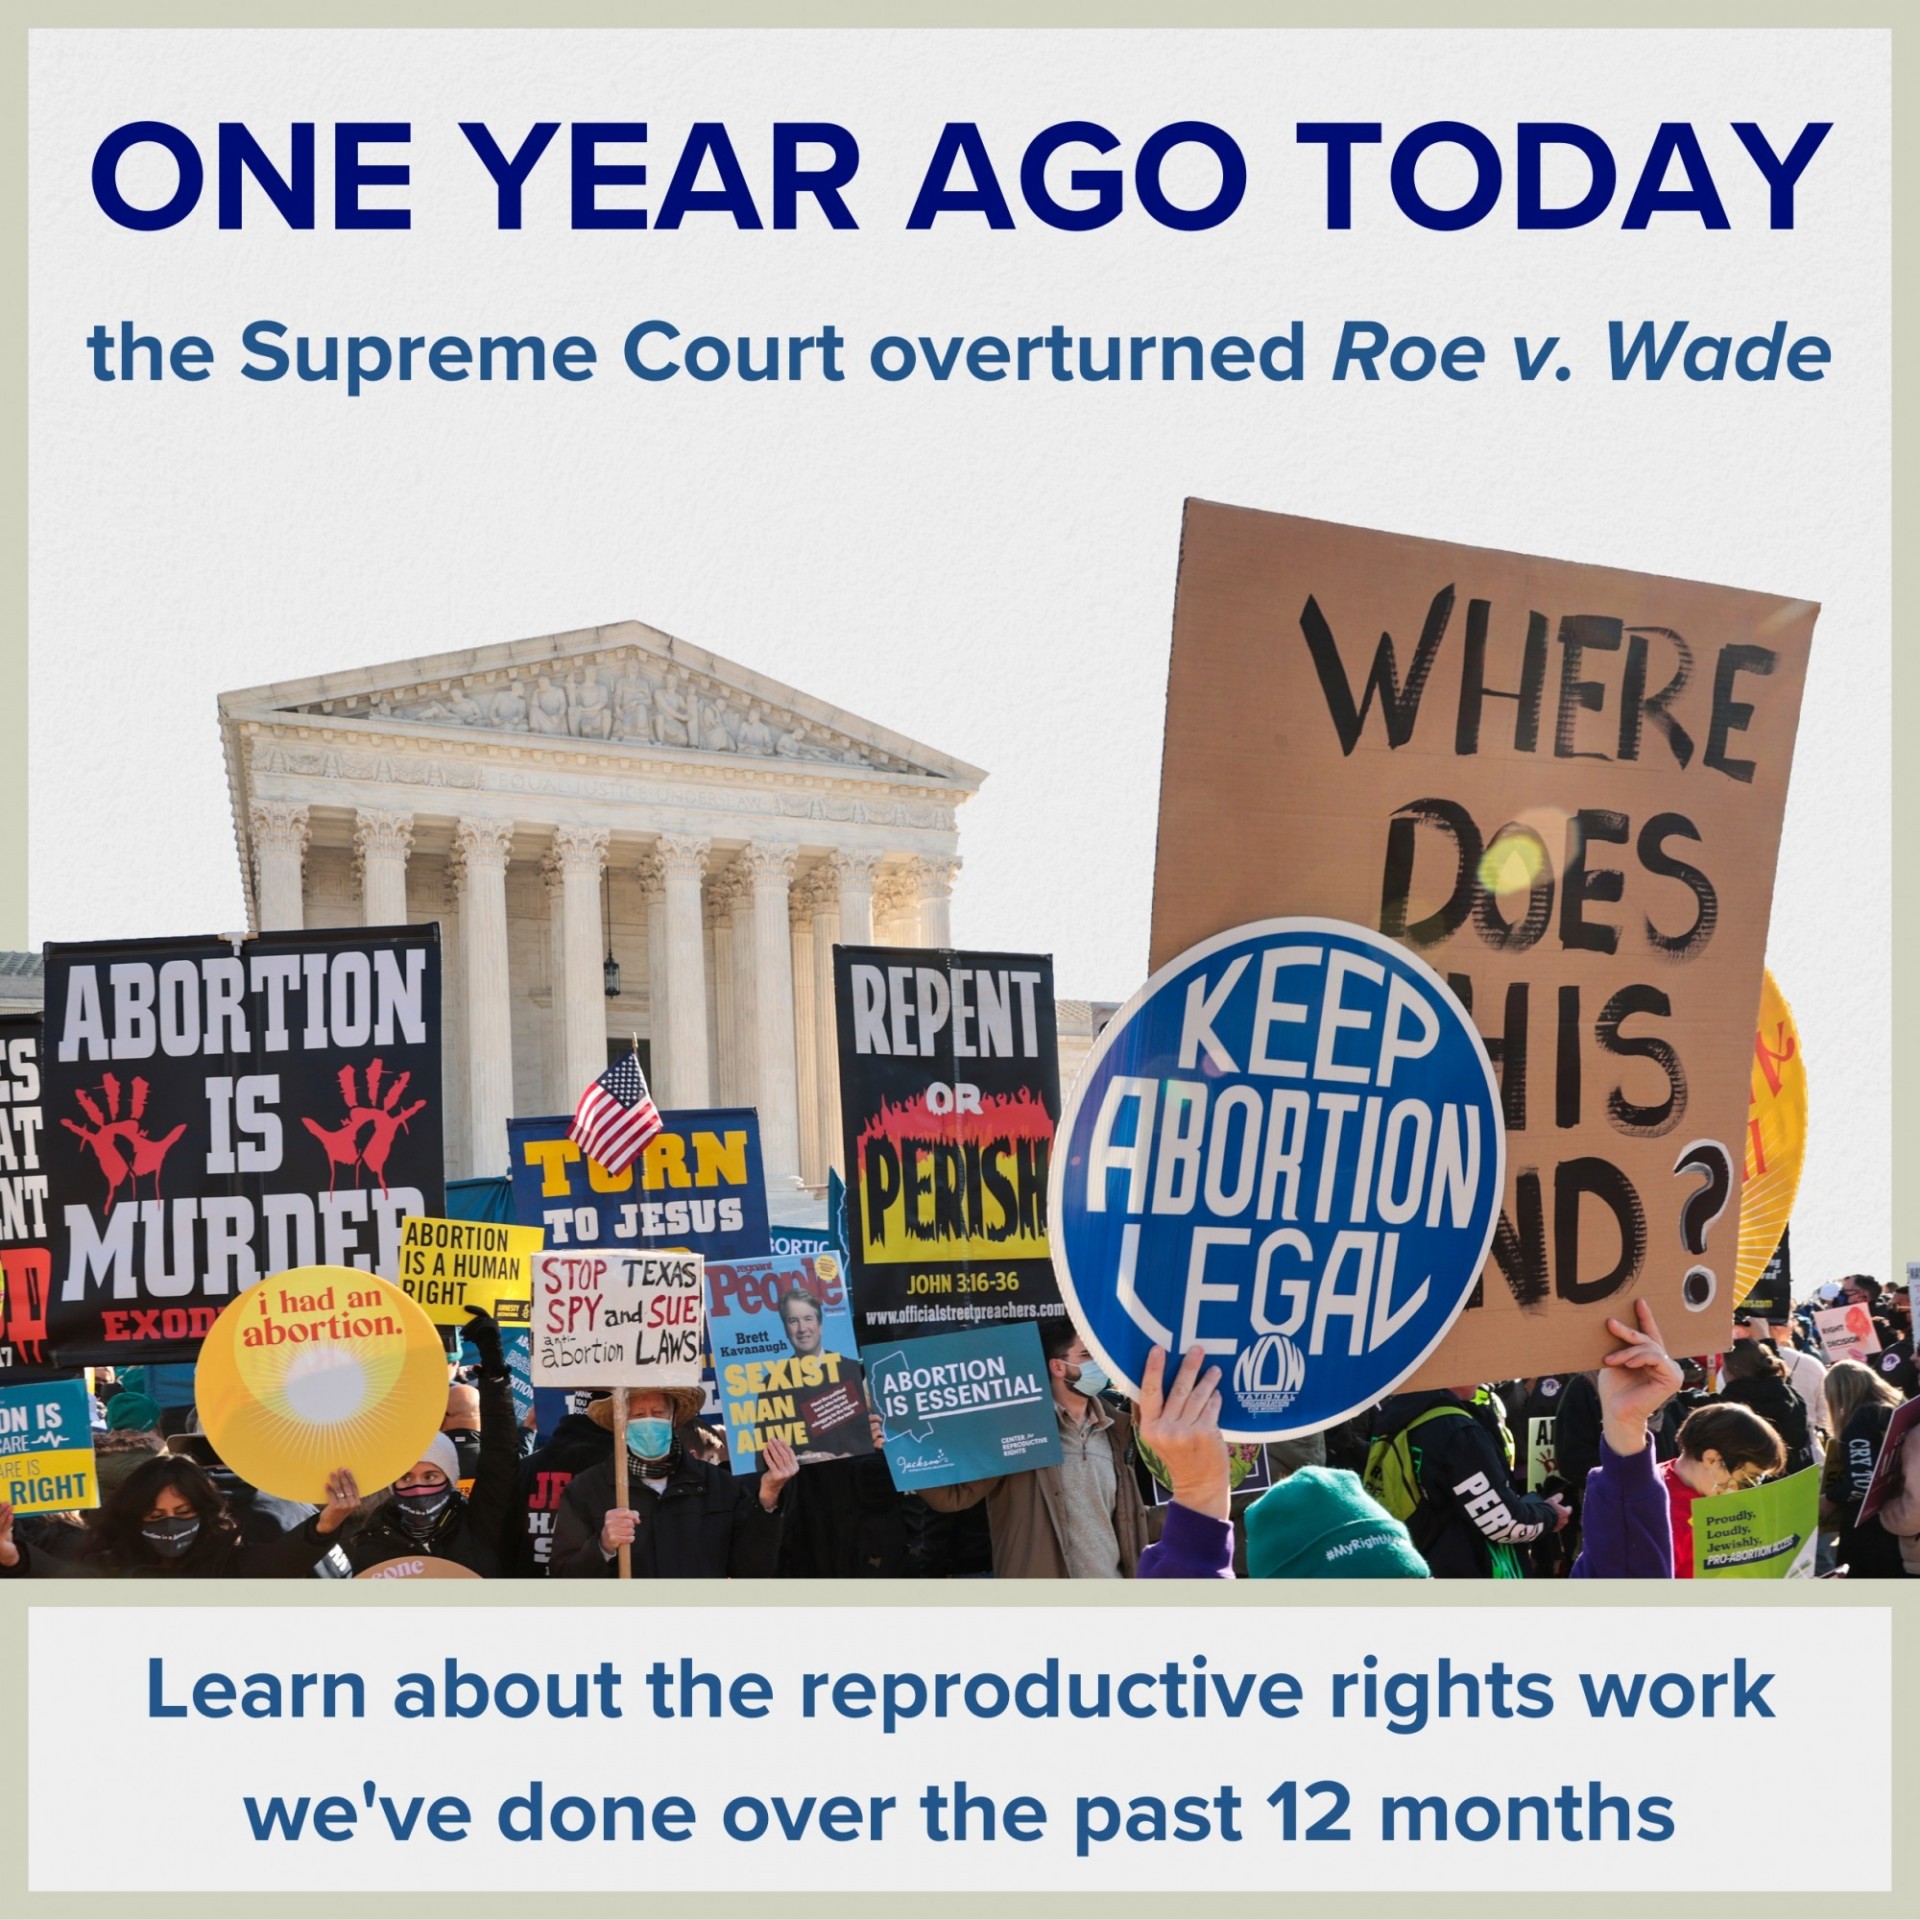 One year ago today the Supreme Court overturned Roe v. Wade. Learn about the reproductive rights work we have done over the past year.